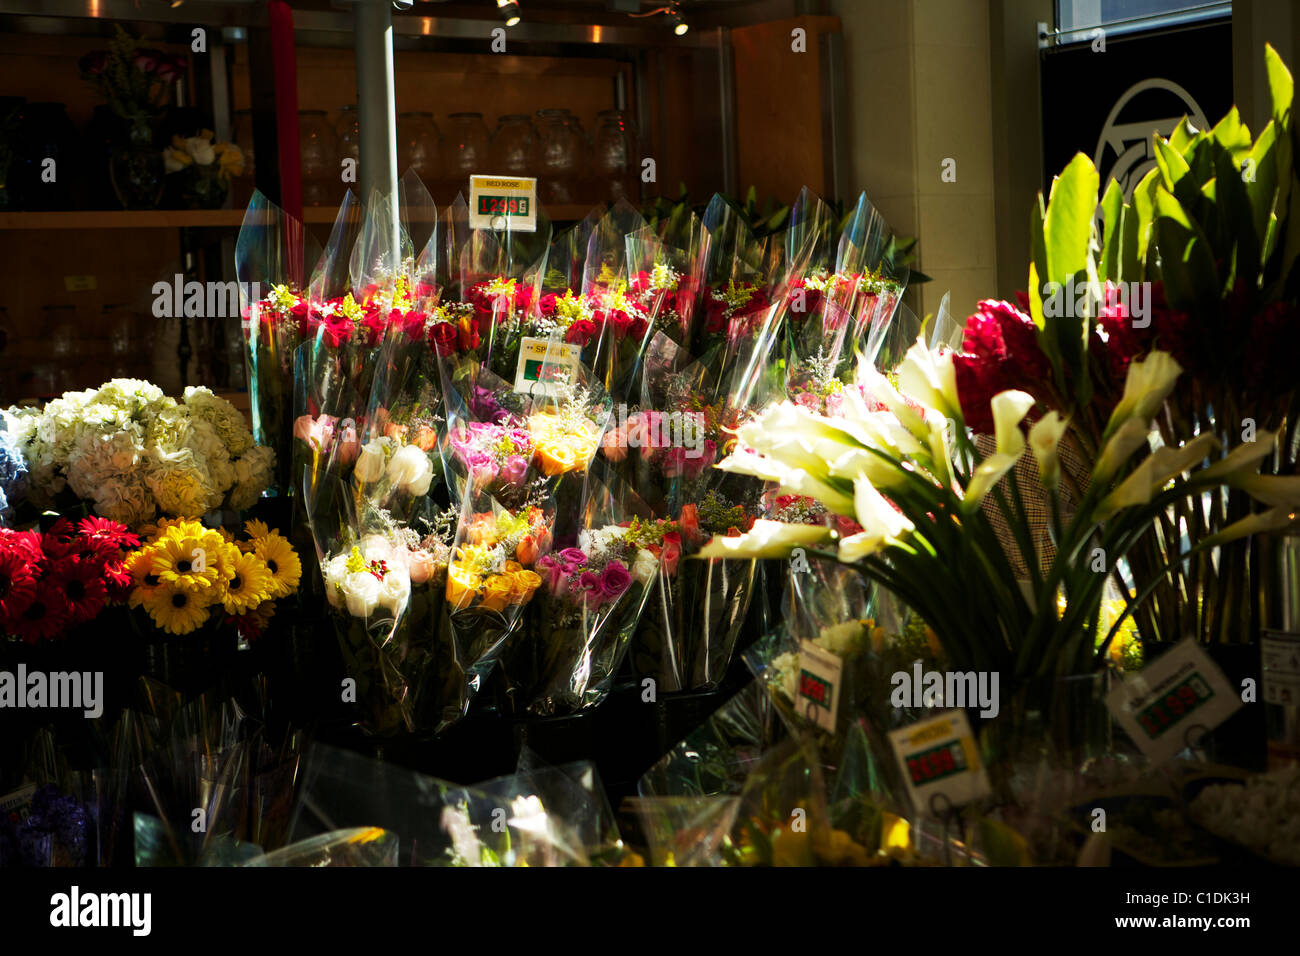 Bunches of flowers for sale outside a store or stall Stock Photo